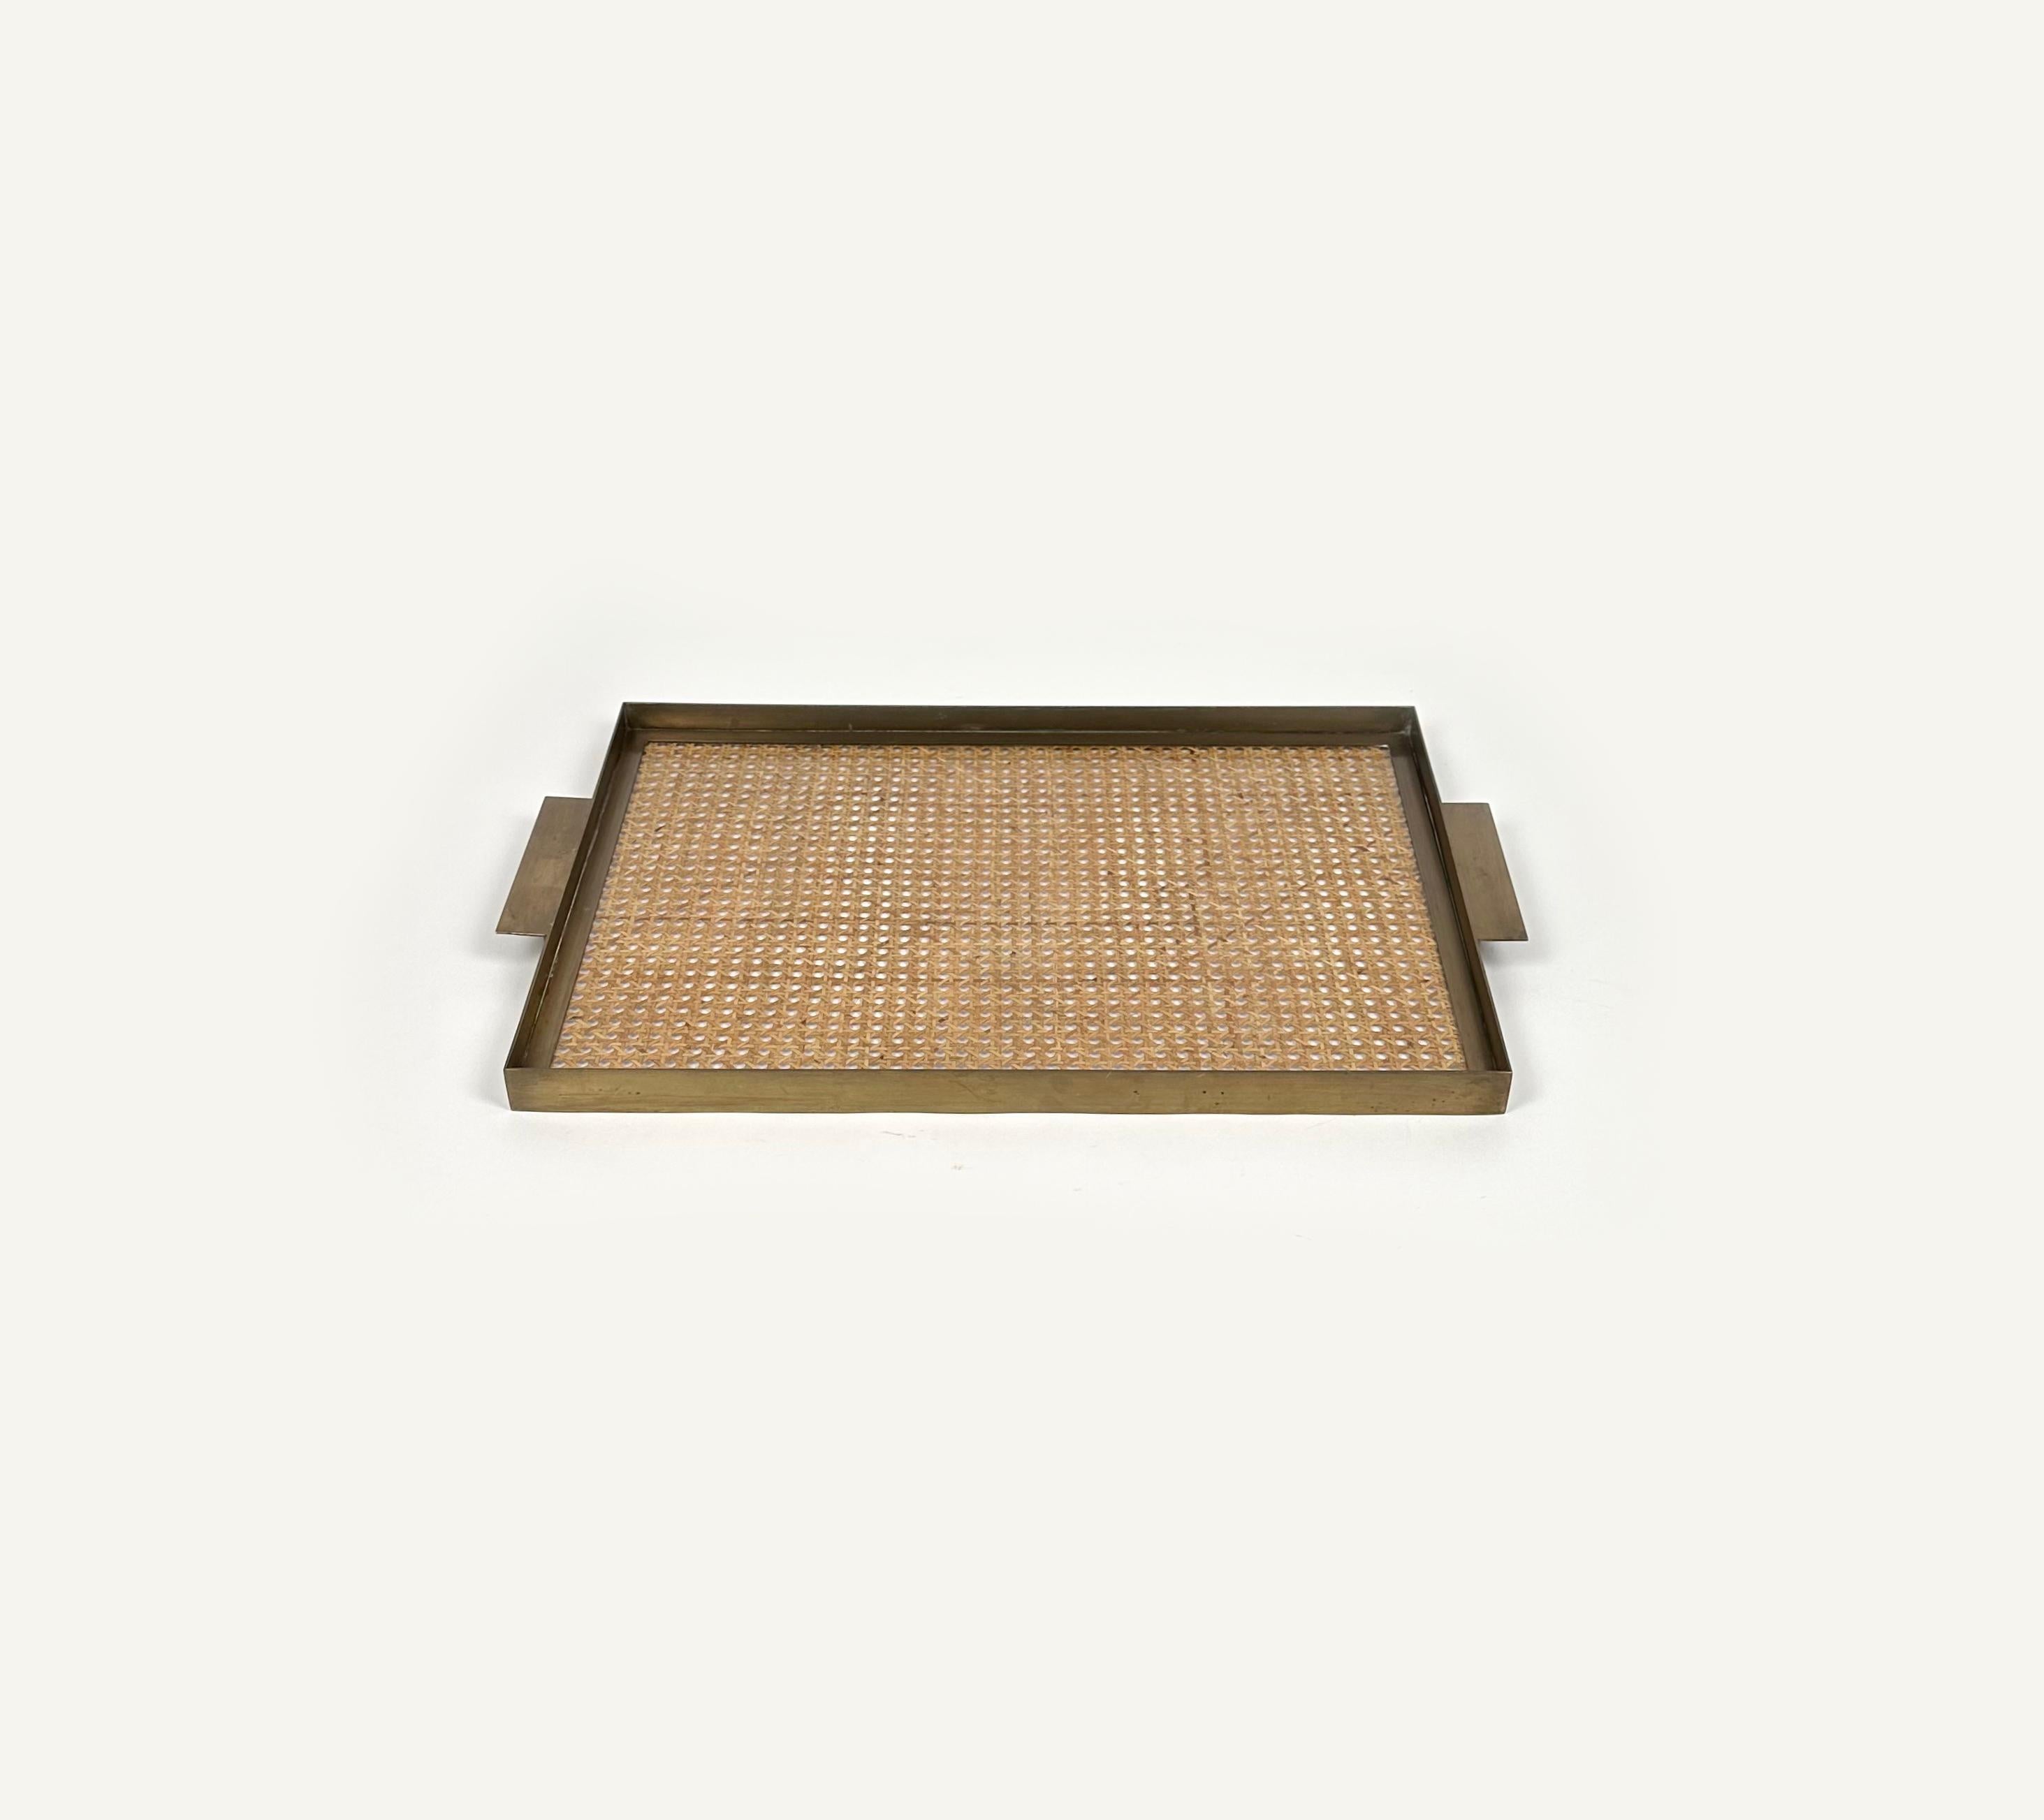 Midcentury beautiful rectangular with handles serving tray in lucite and rattan with brass border in the style of Christian Dior.

Made in Italy in the 1970s.

Great accessory for any modern interior.